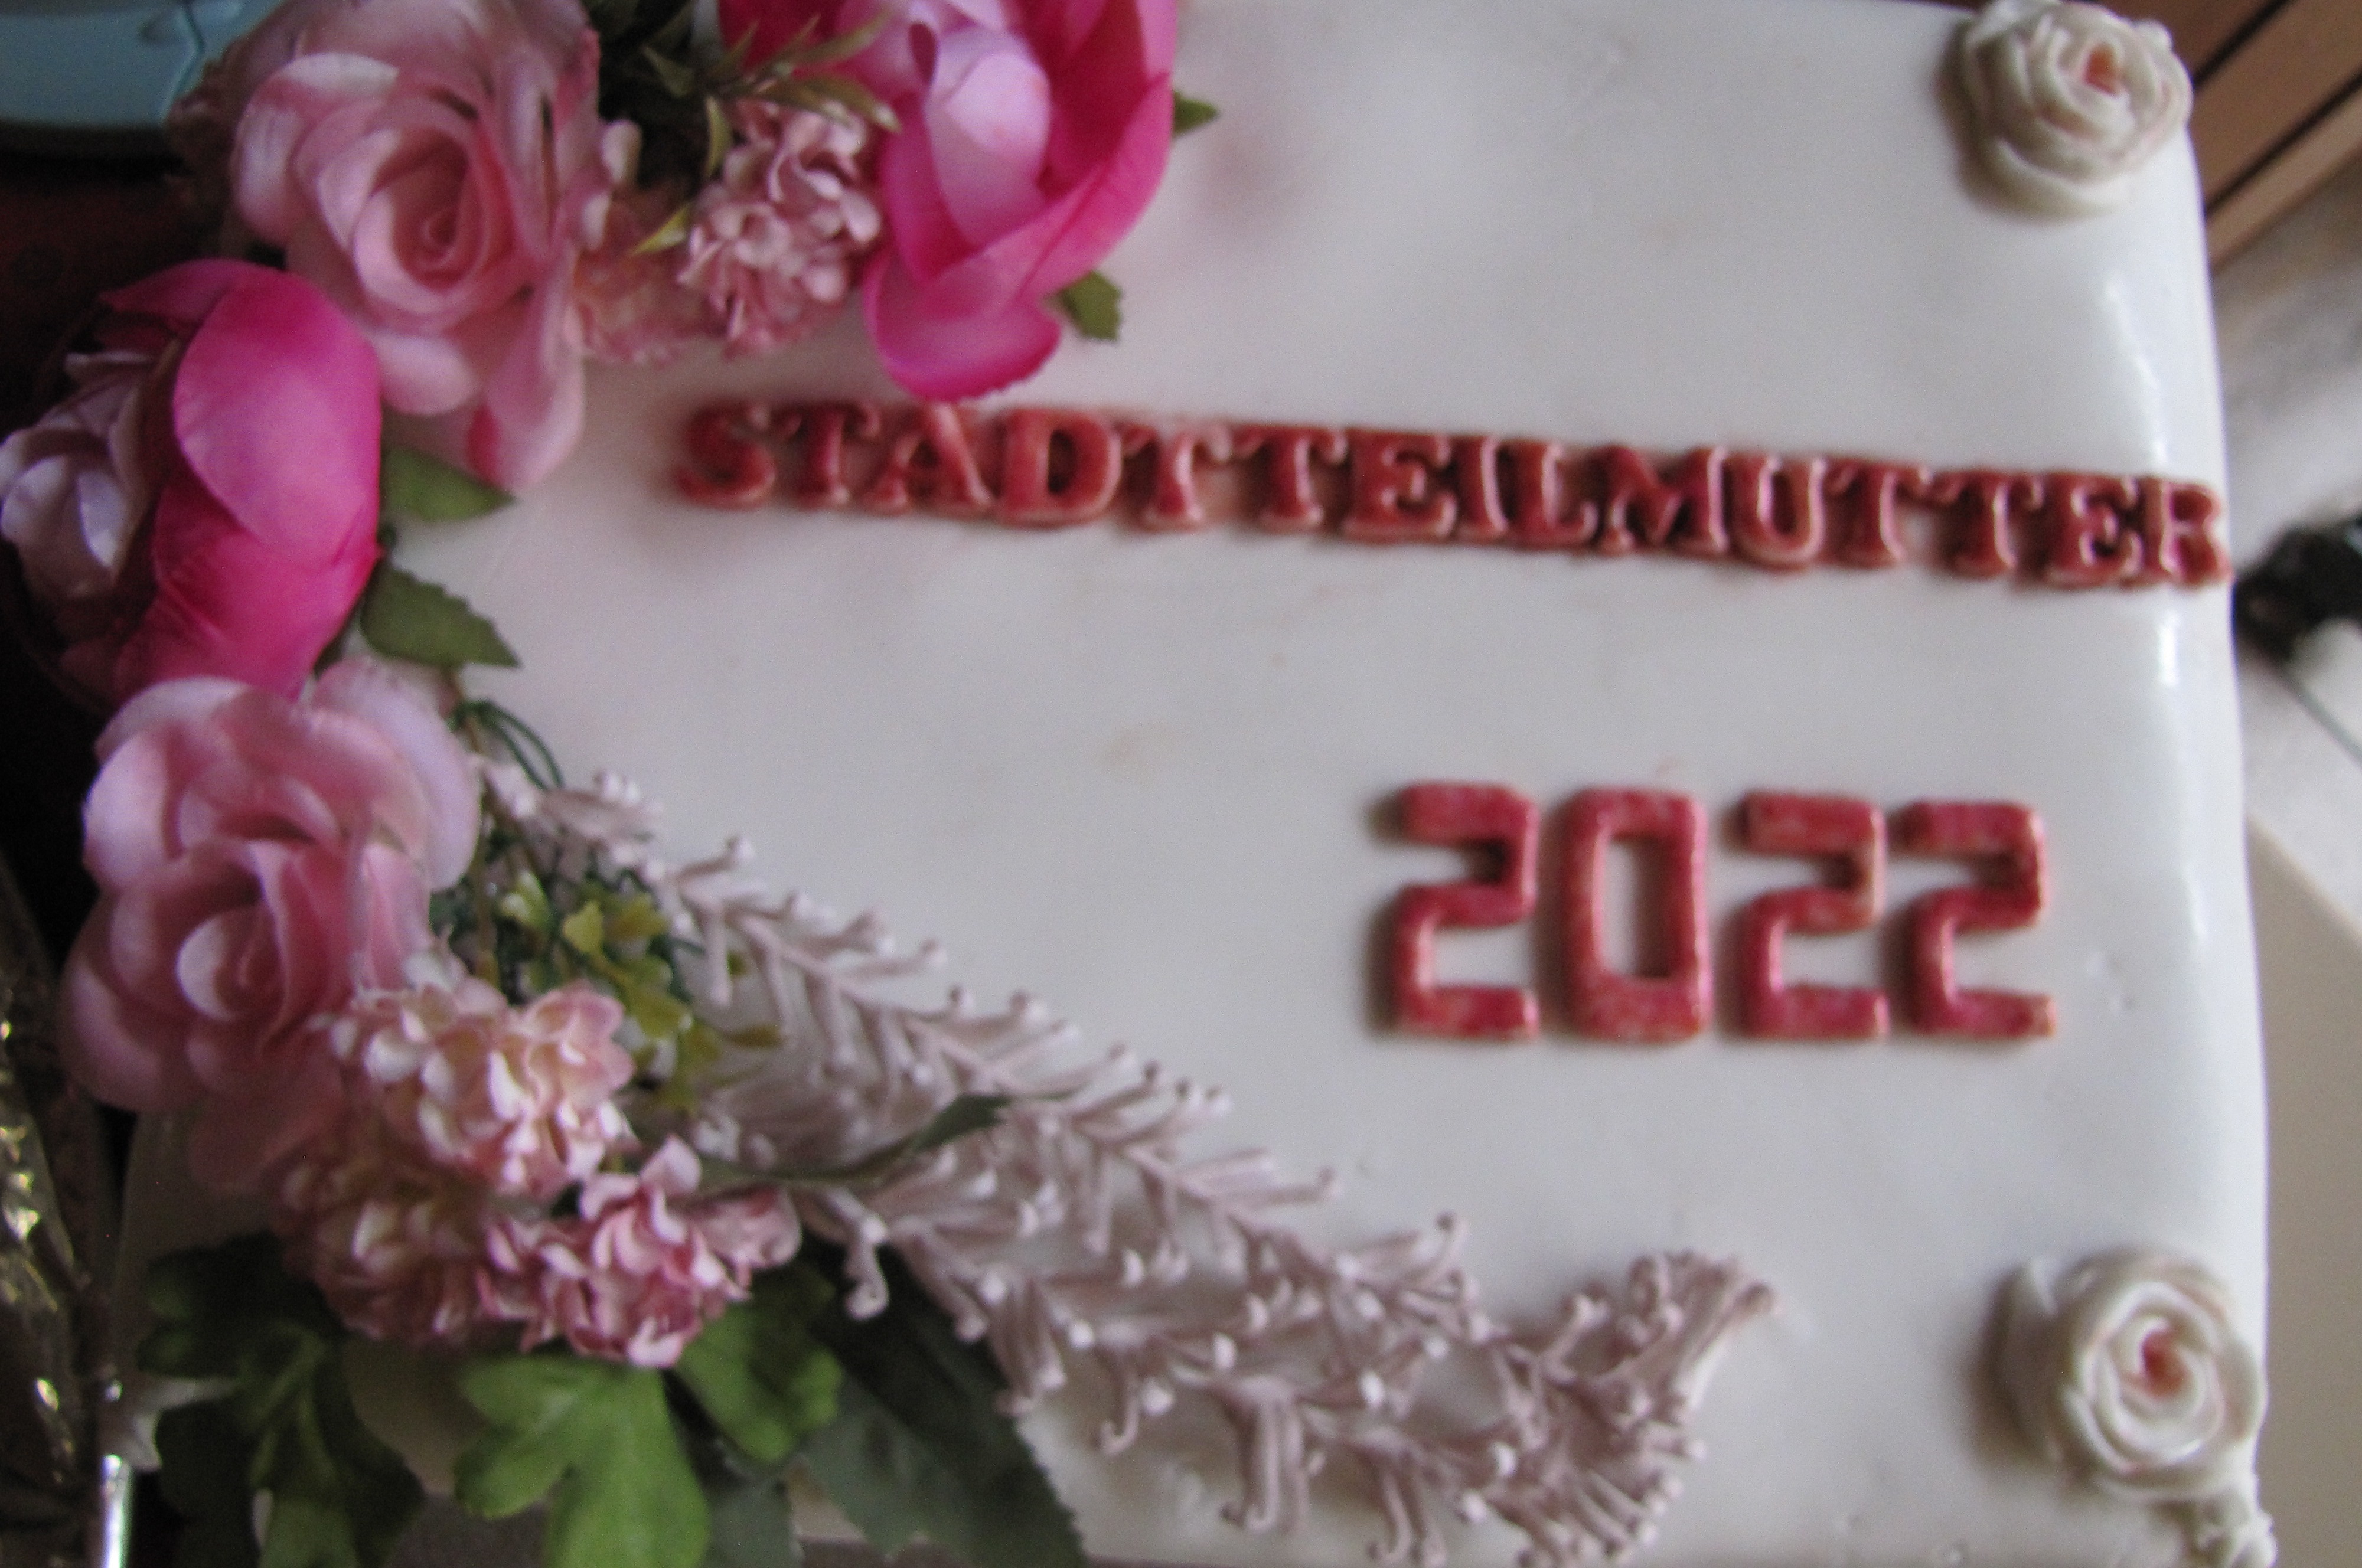 Anniversary cake with the inscription "District mother 2022".